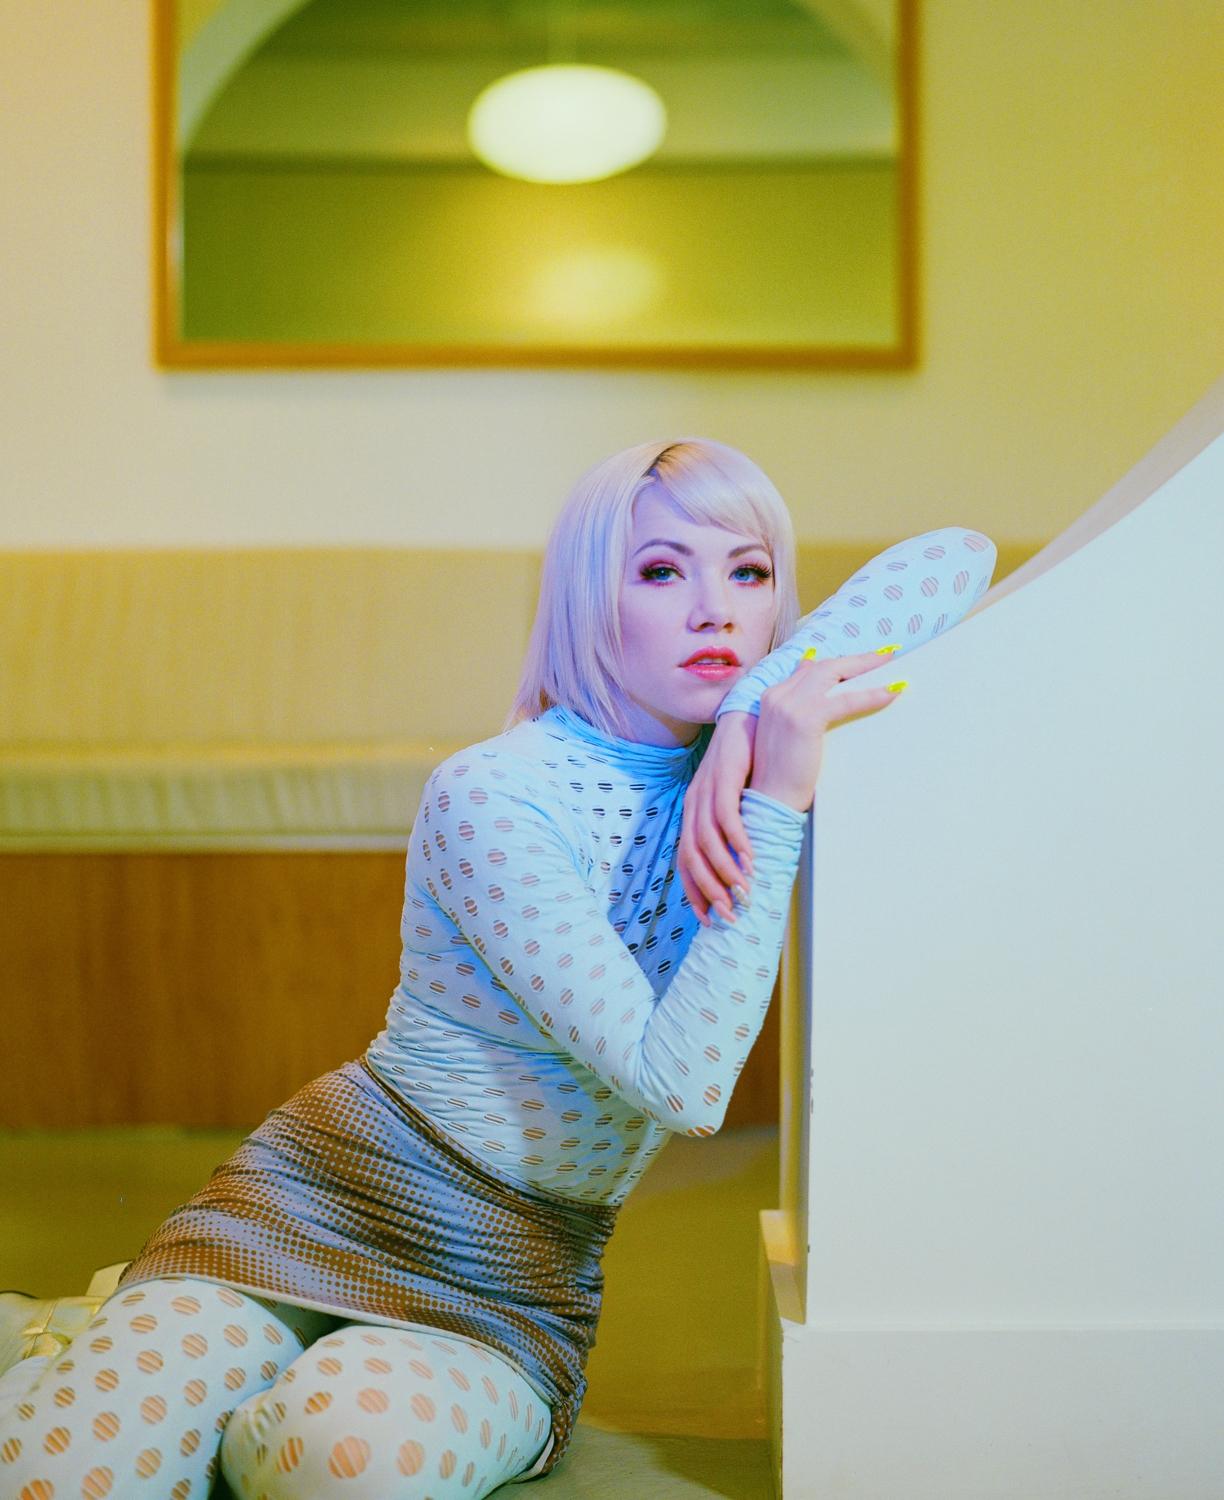 Musicians - Carly Rae Jepsen for the Fader